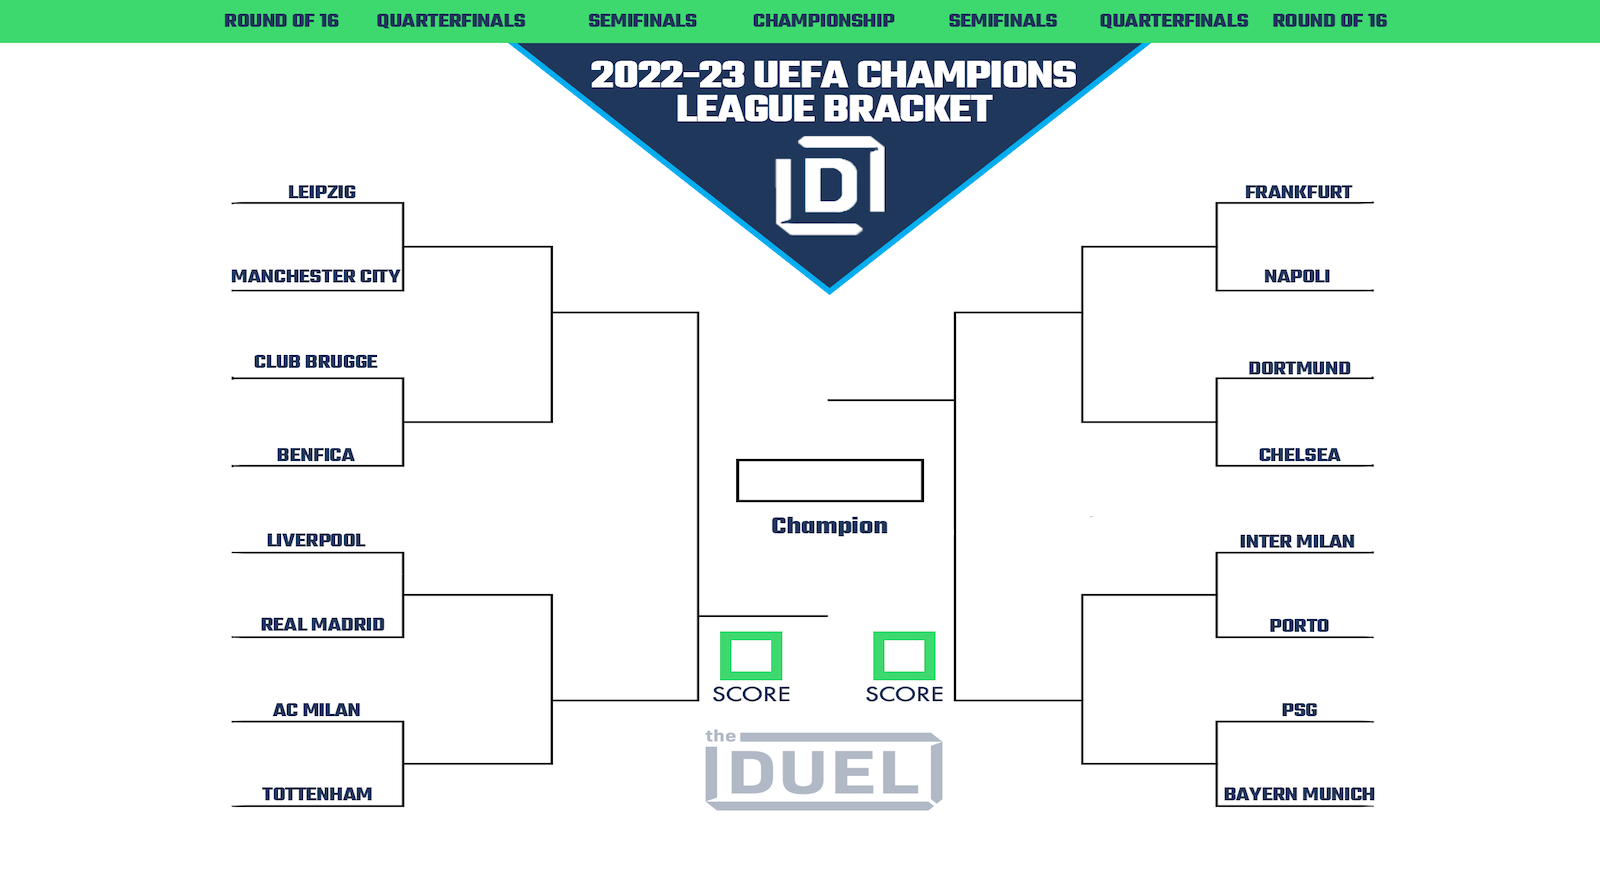 Printable Bracket for UEFA Champions League Round of 16